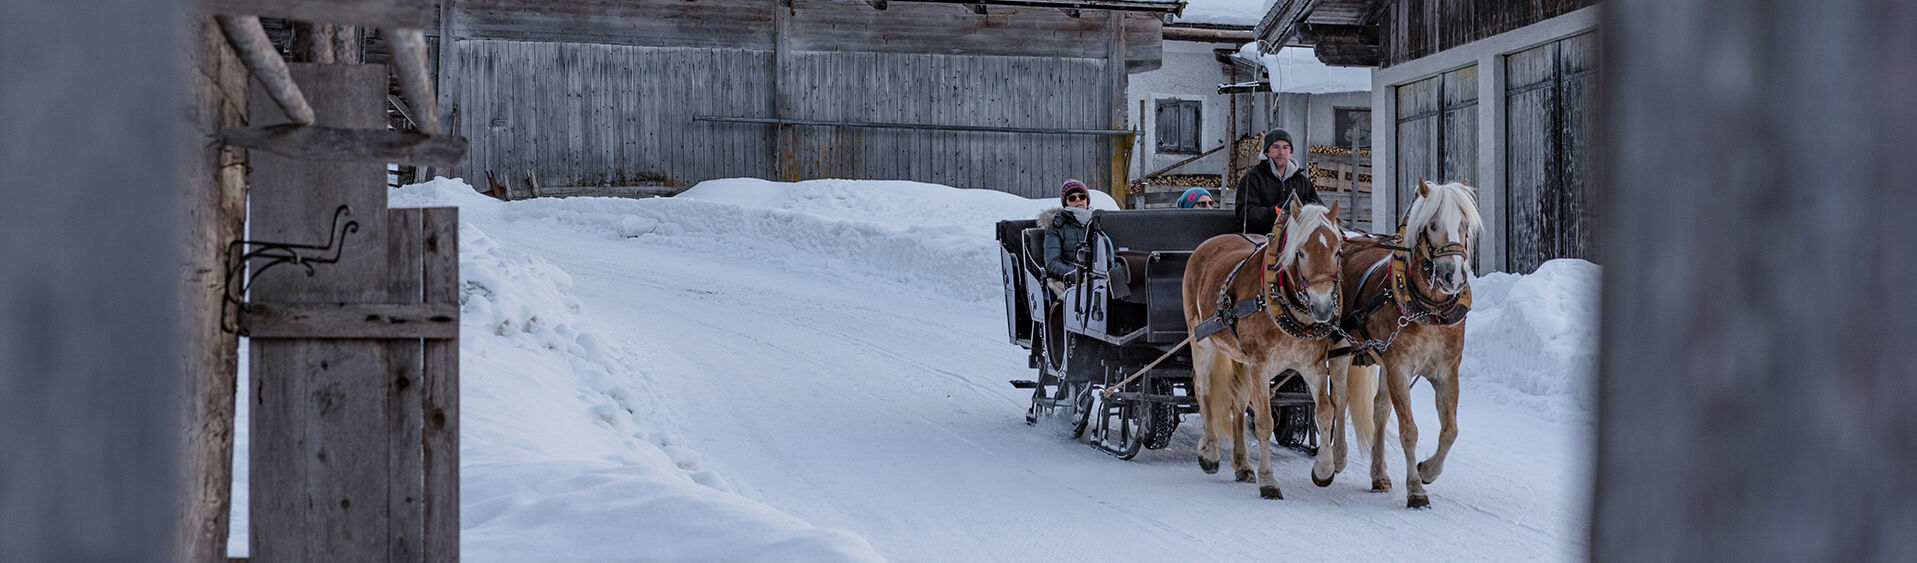 Horse-drawn sleigh rides are a great way to discover the surroundings of Lake Achensee off the ski slopes.